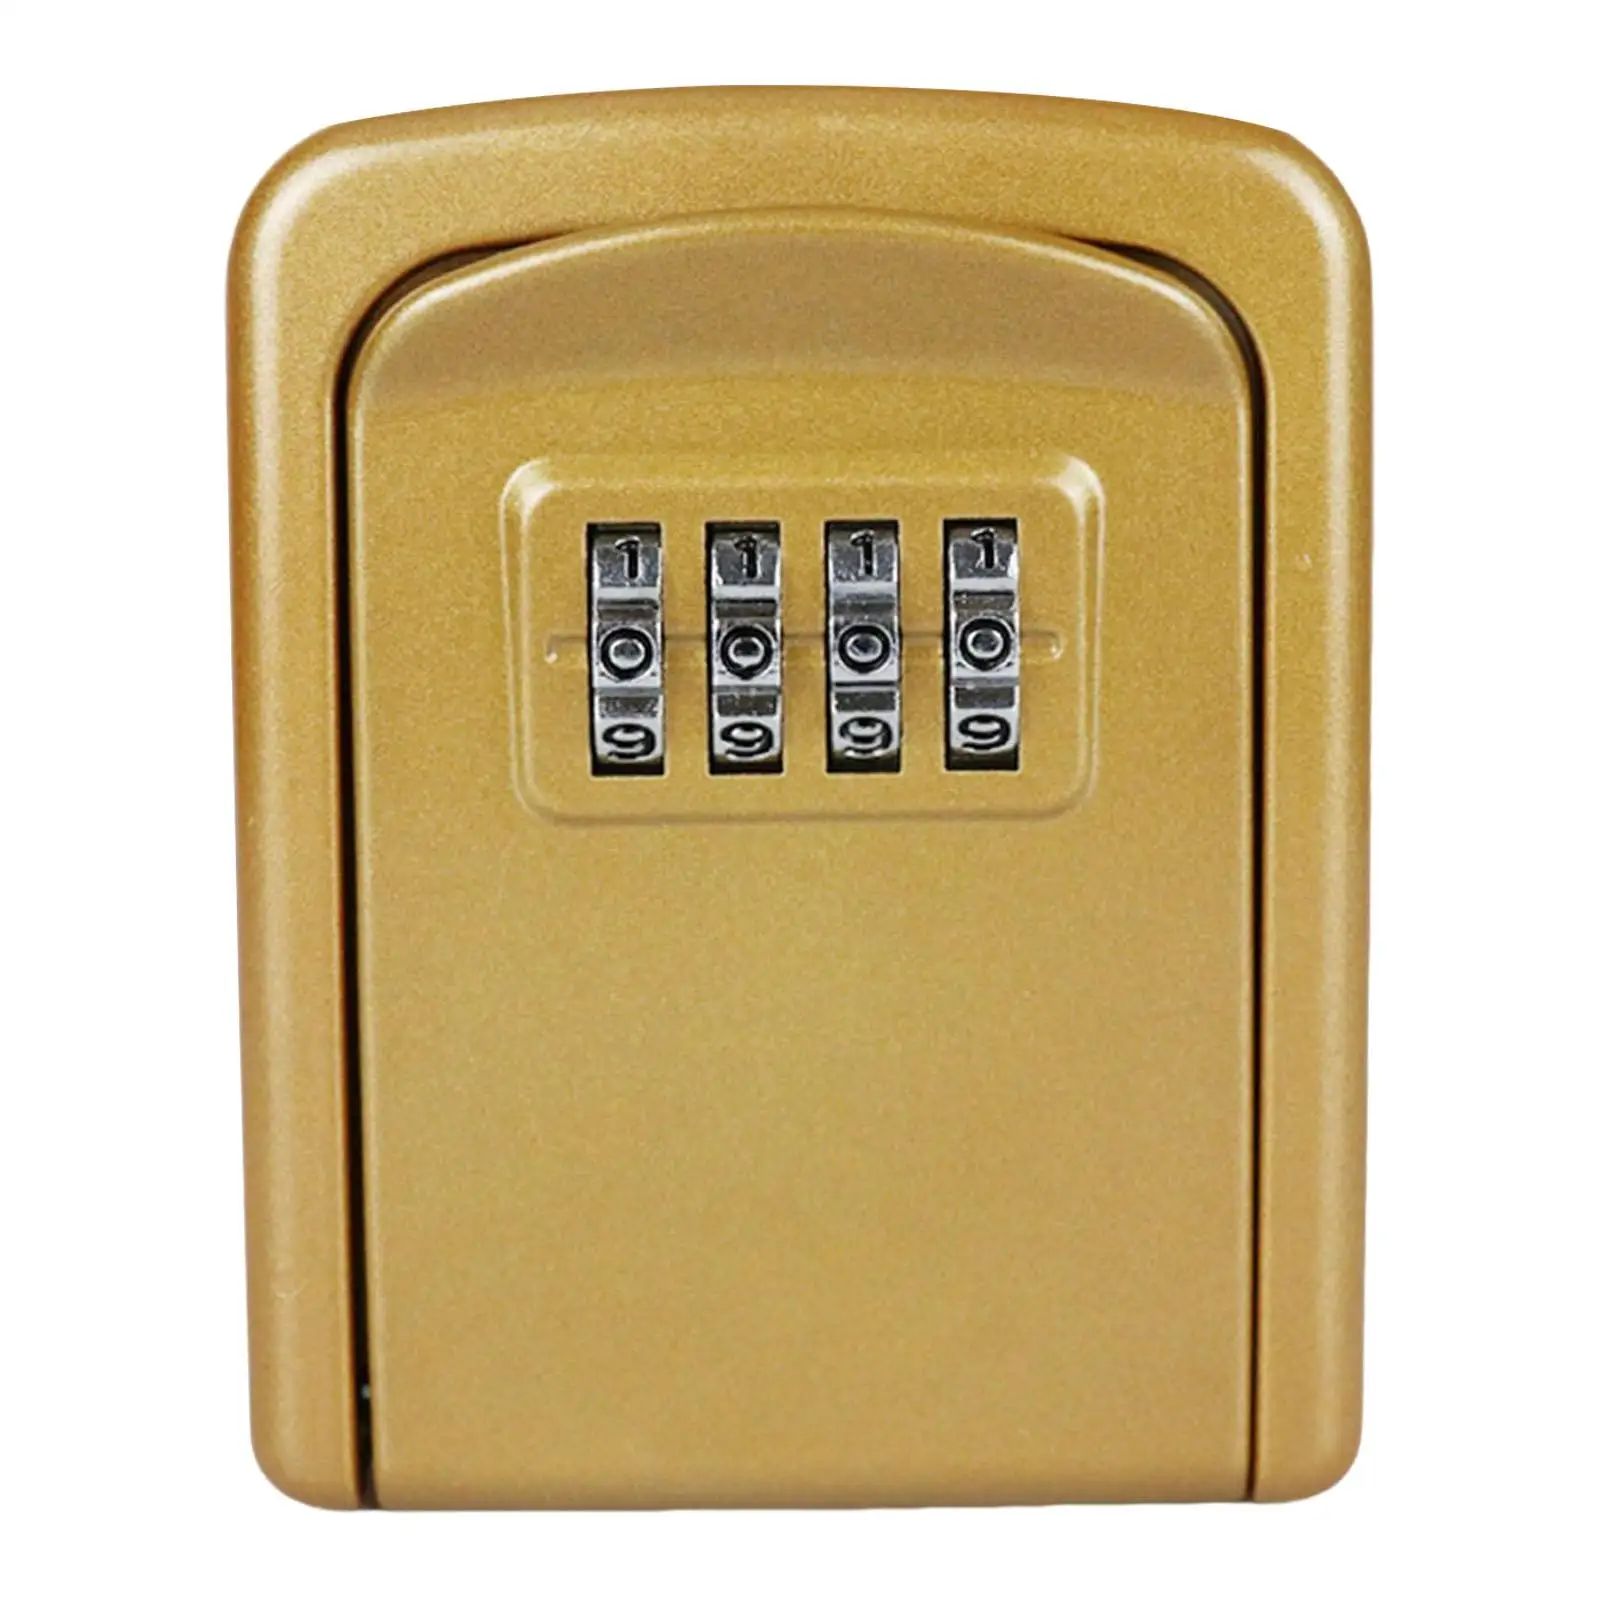 Outdoor Key Storage Lock Box Password Key Storage Case Wall Mounted for Indoor Home